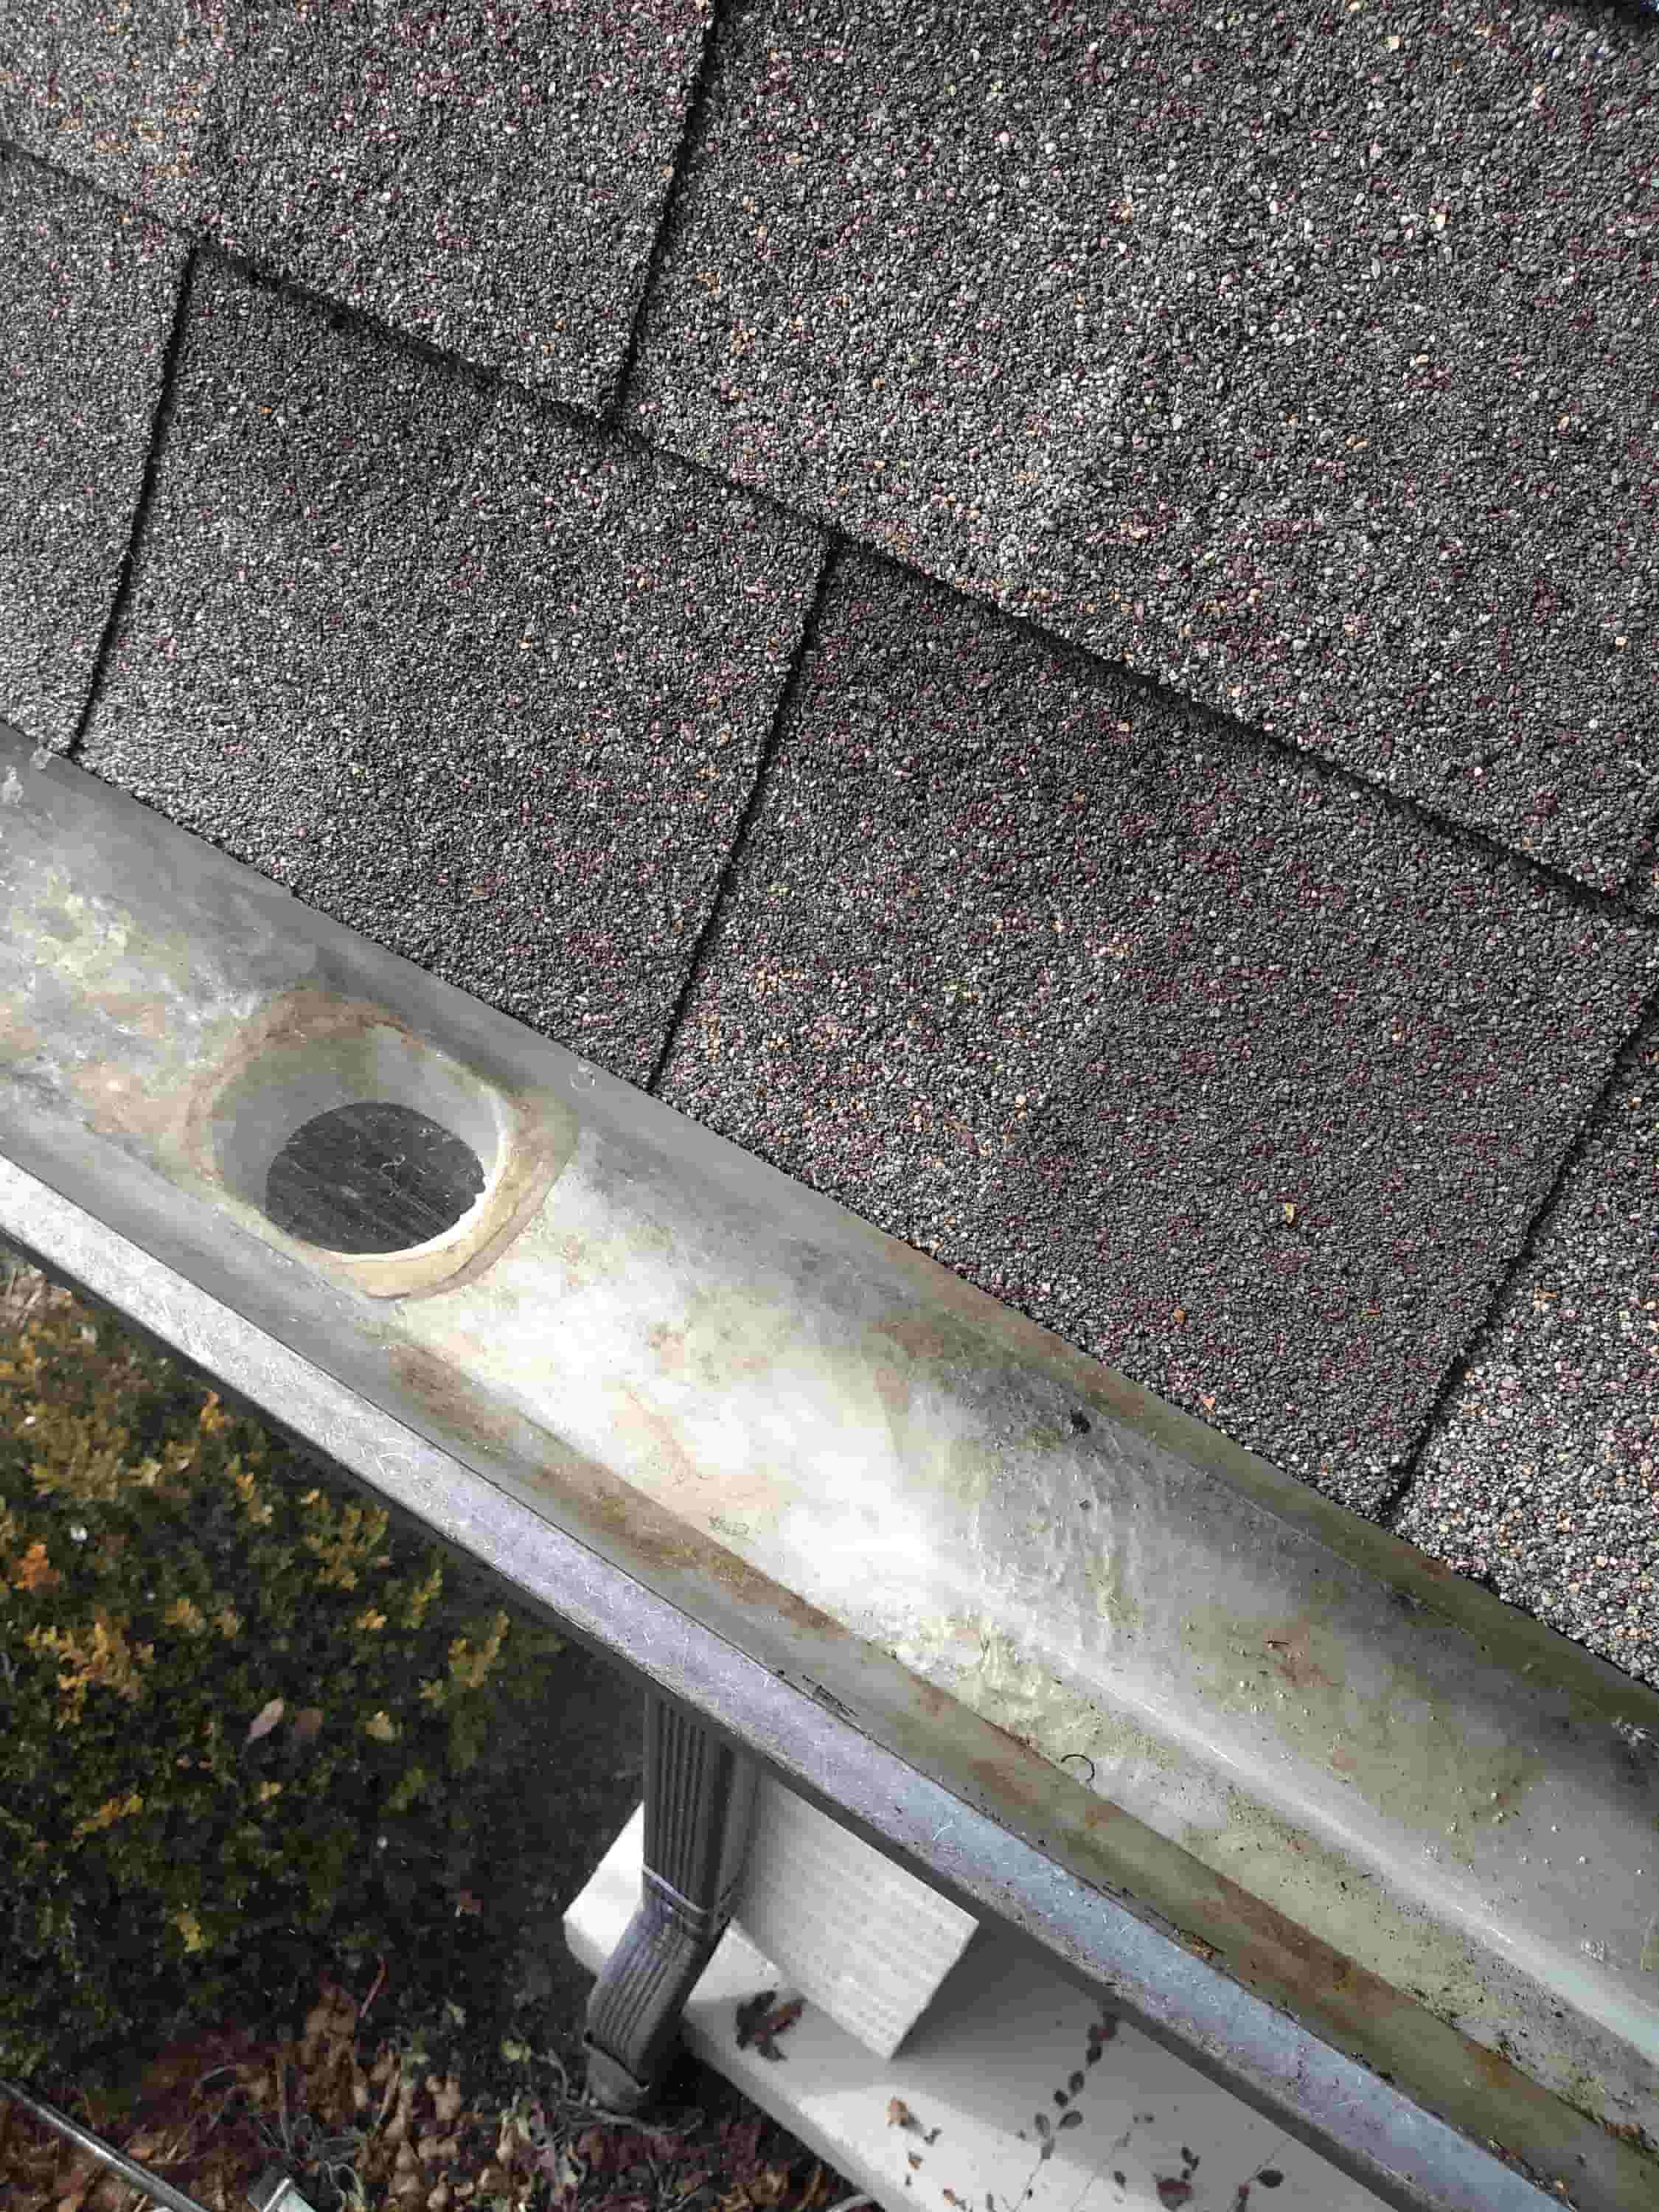 eavestrough cleaning and repair